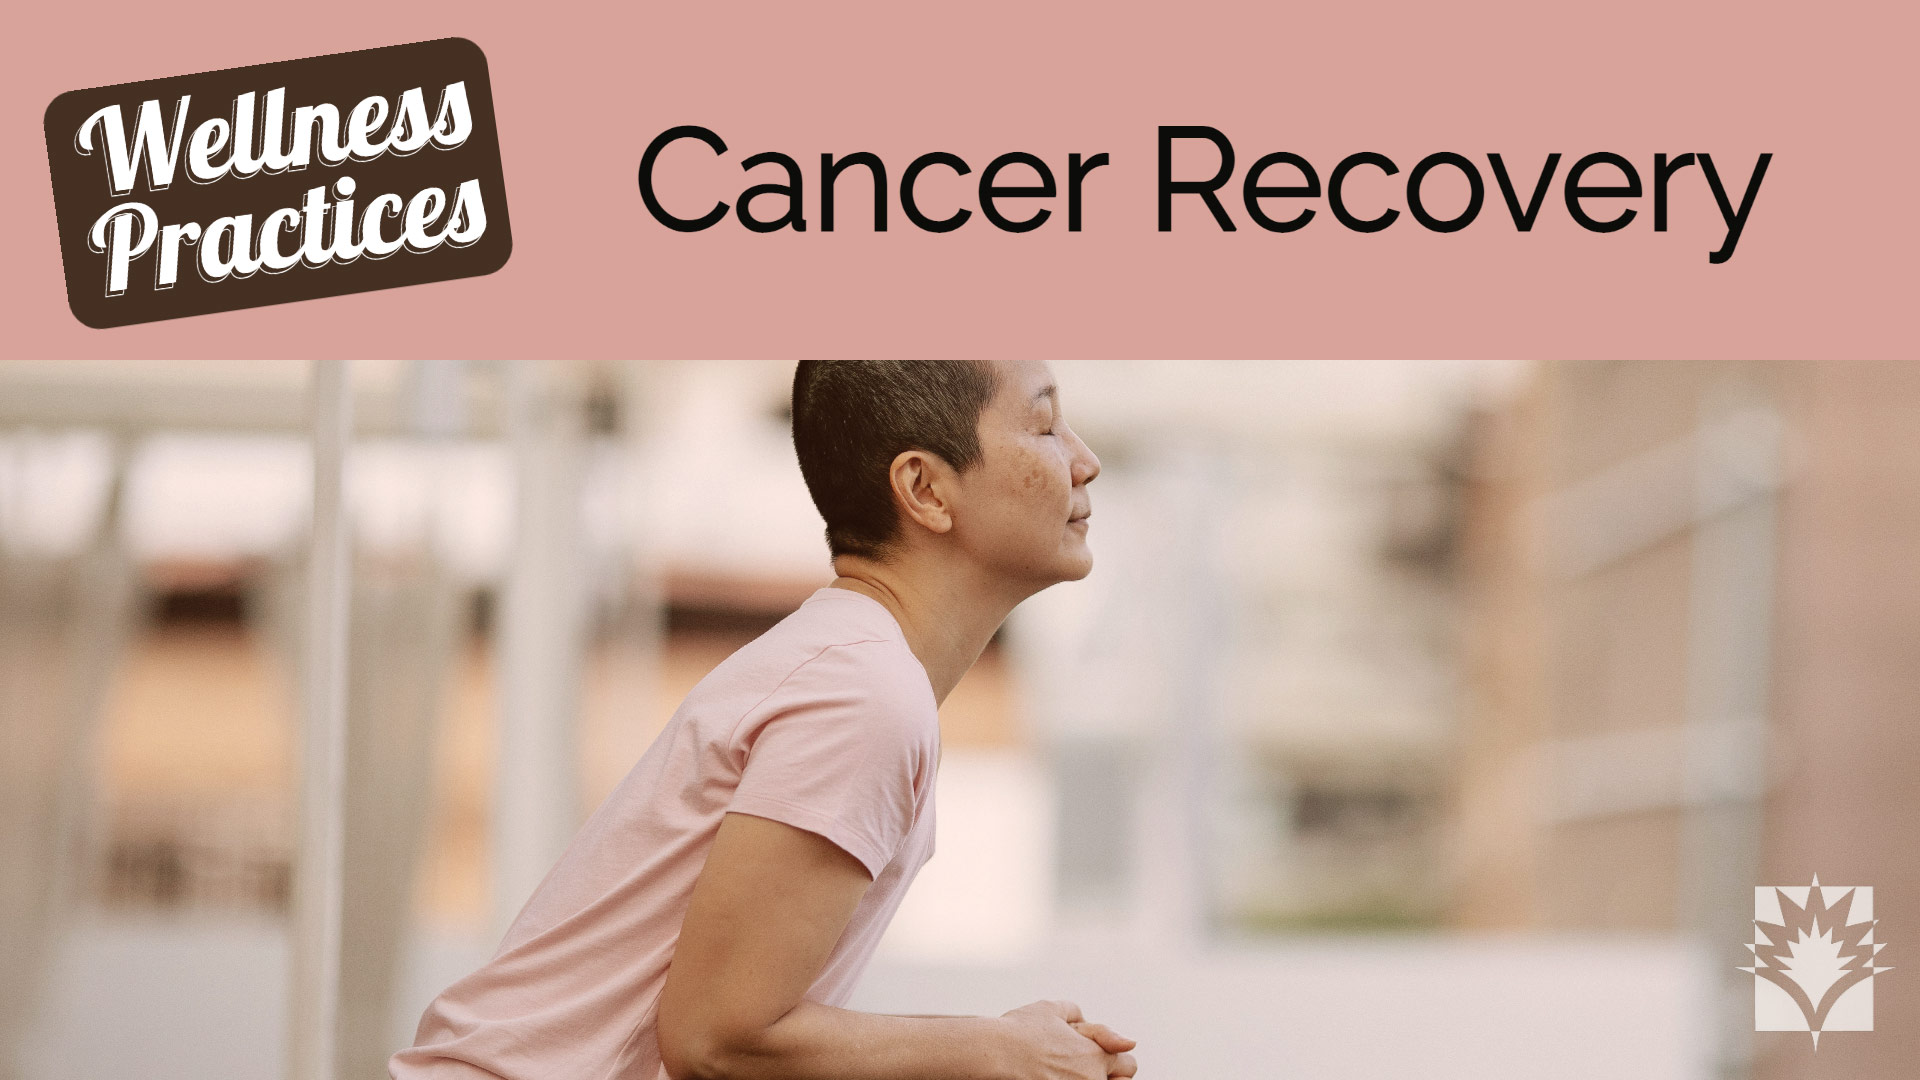 Cancer Recovery